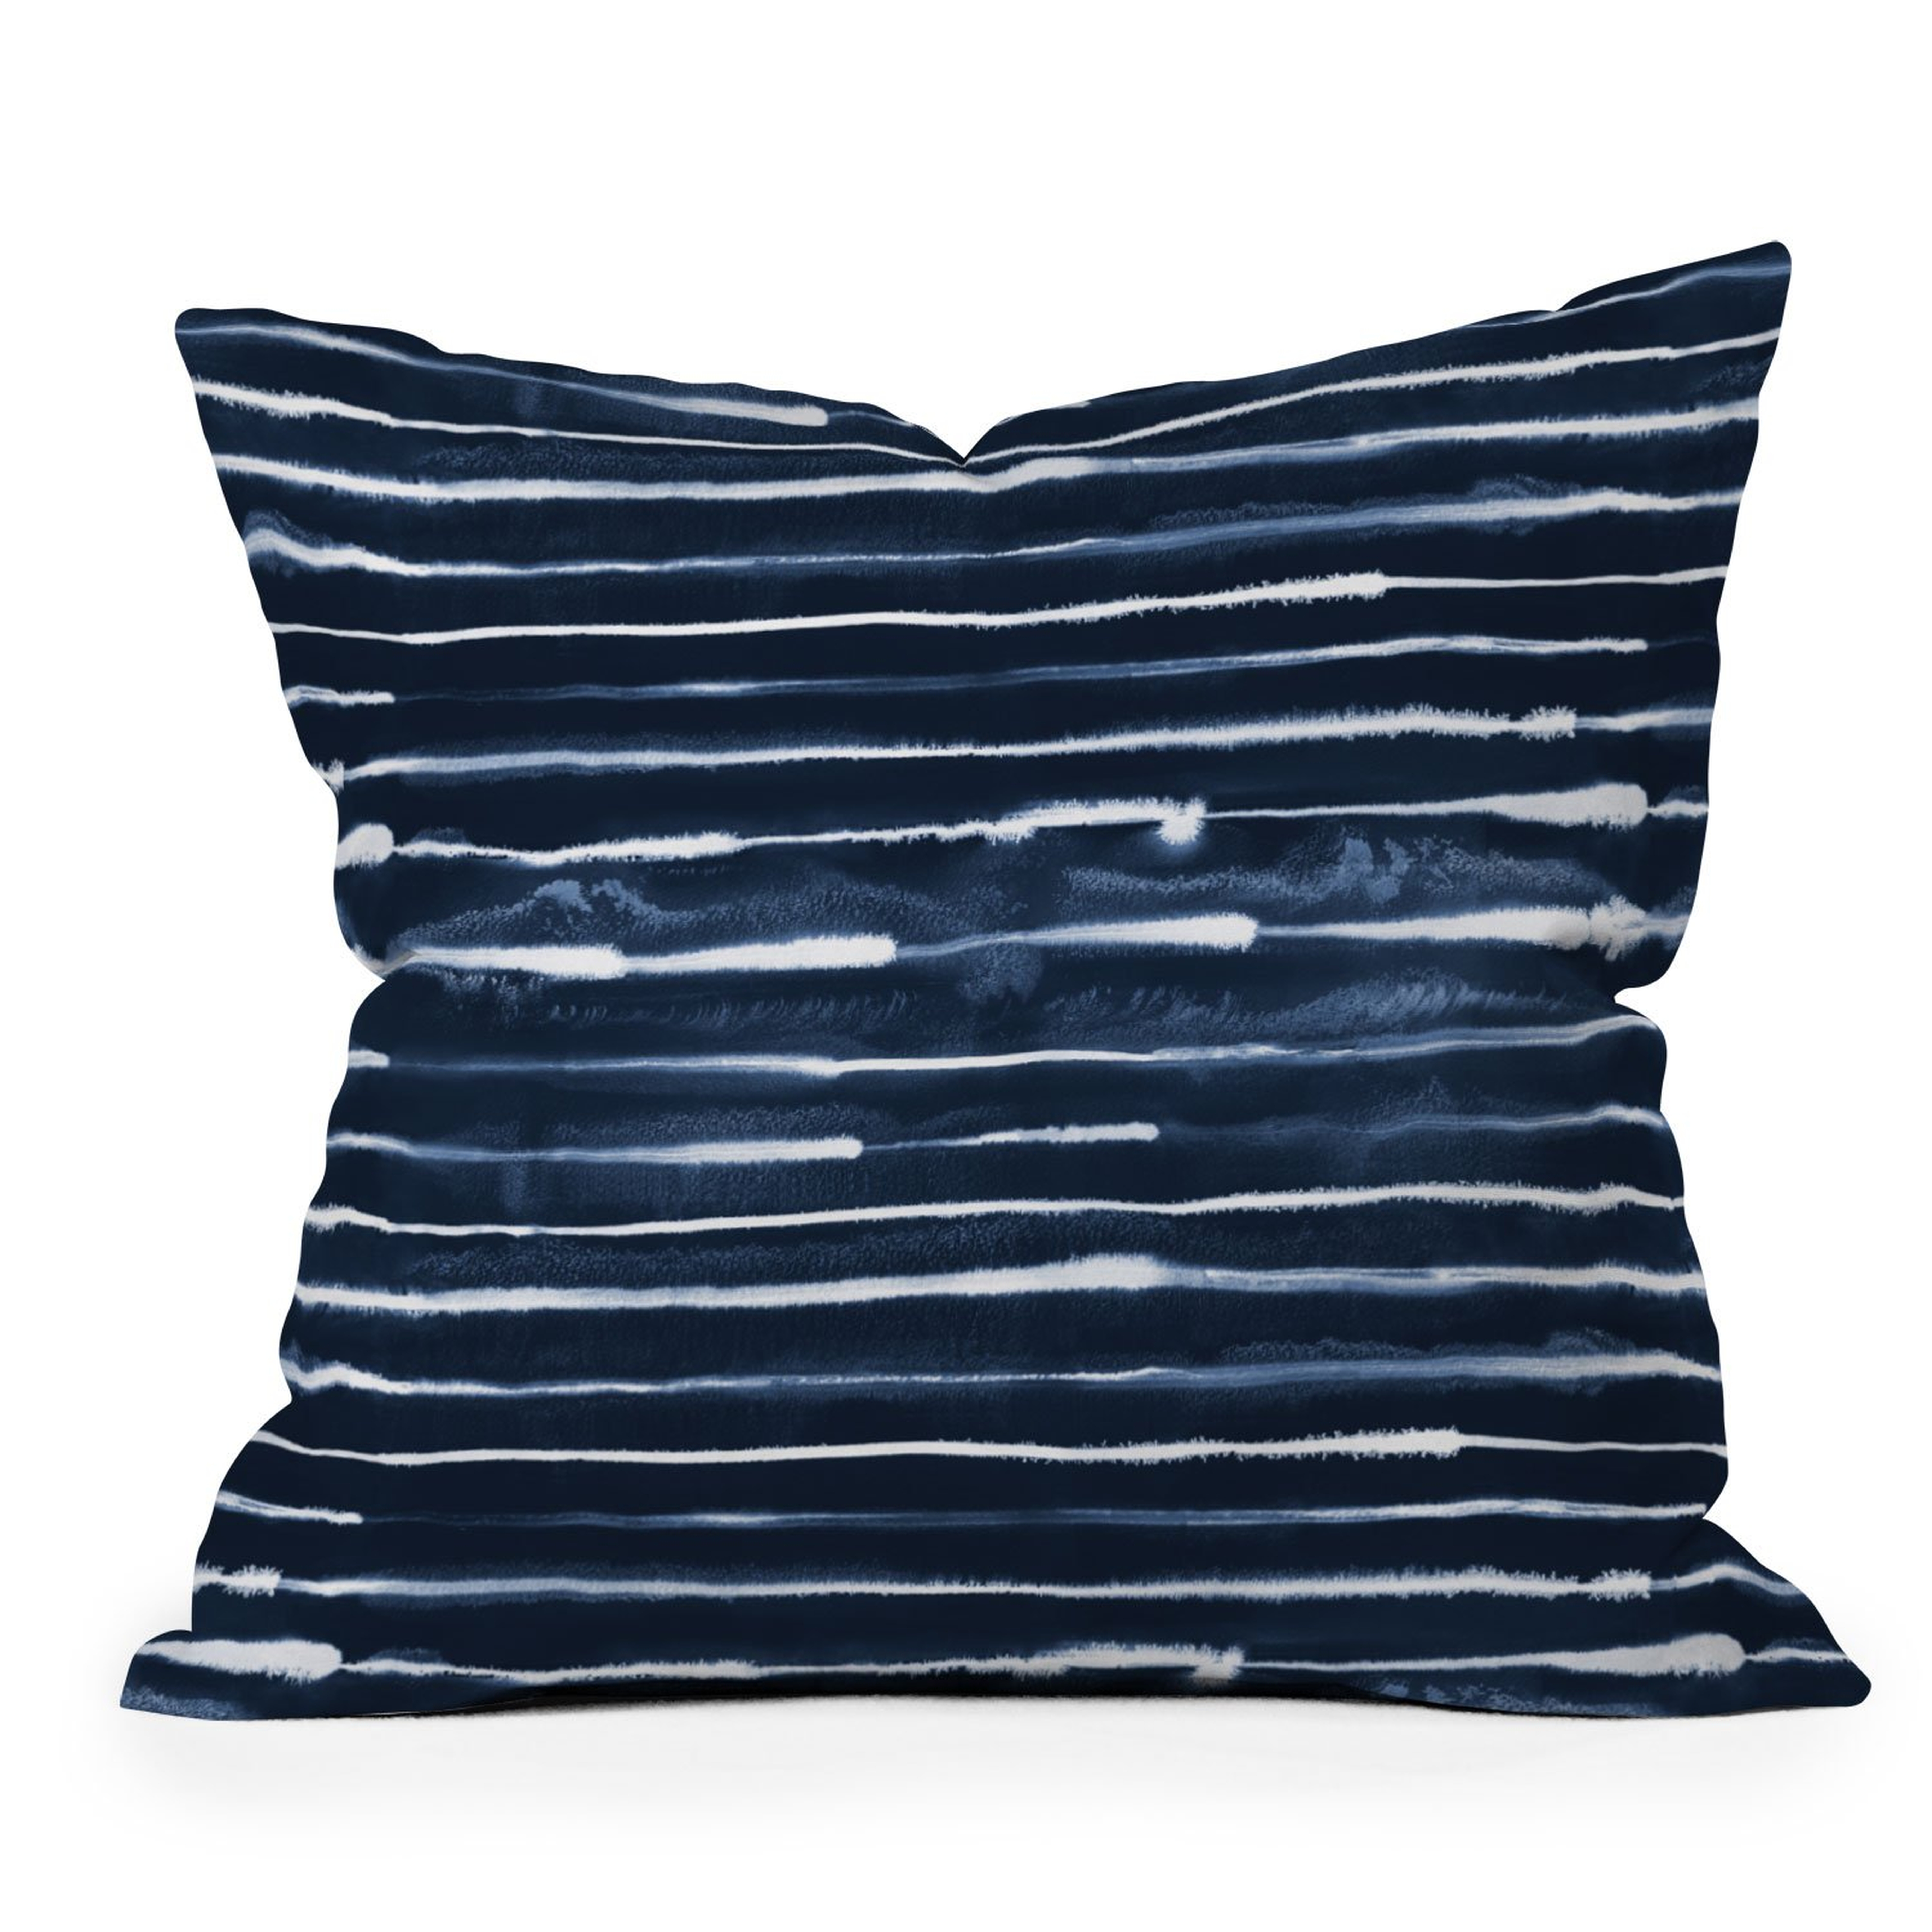 NAVY INK STRIPES Throw Pillow 18" with insert - Wander Print Co.